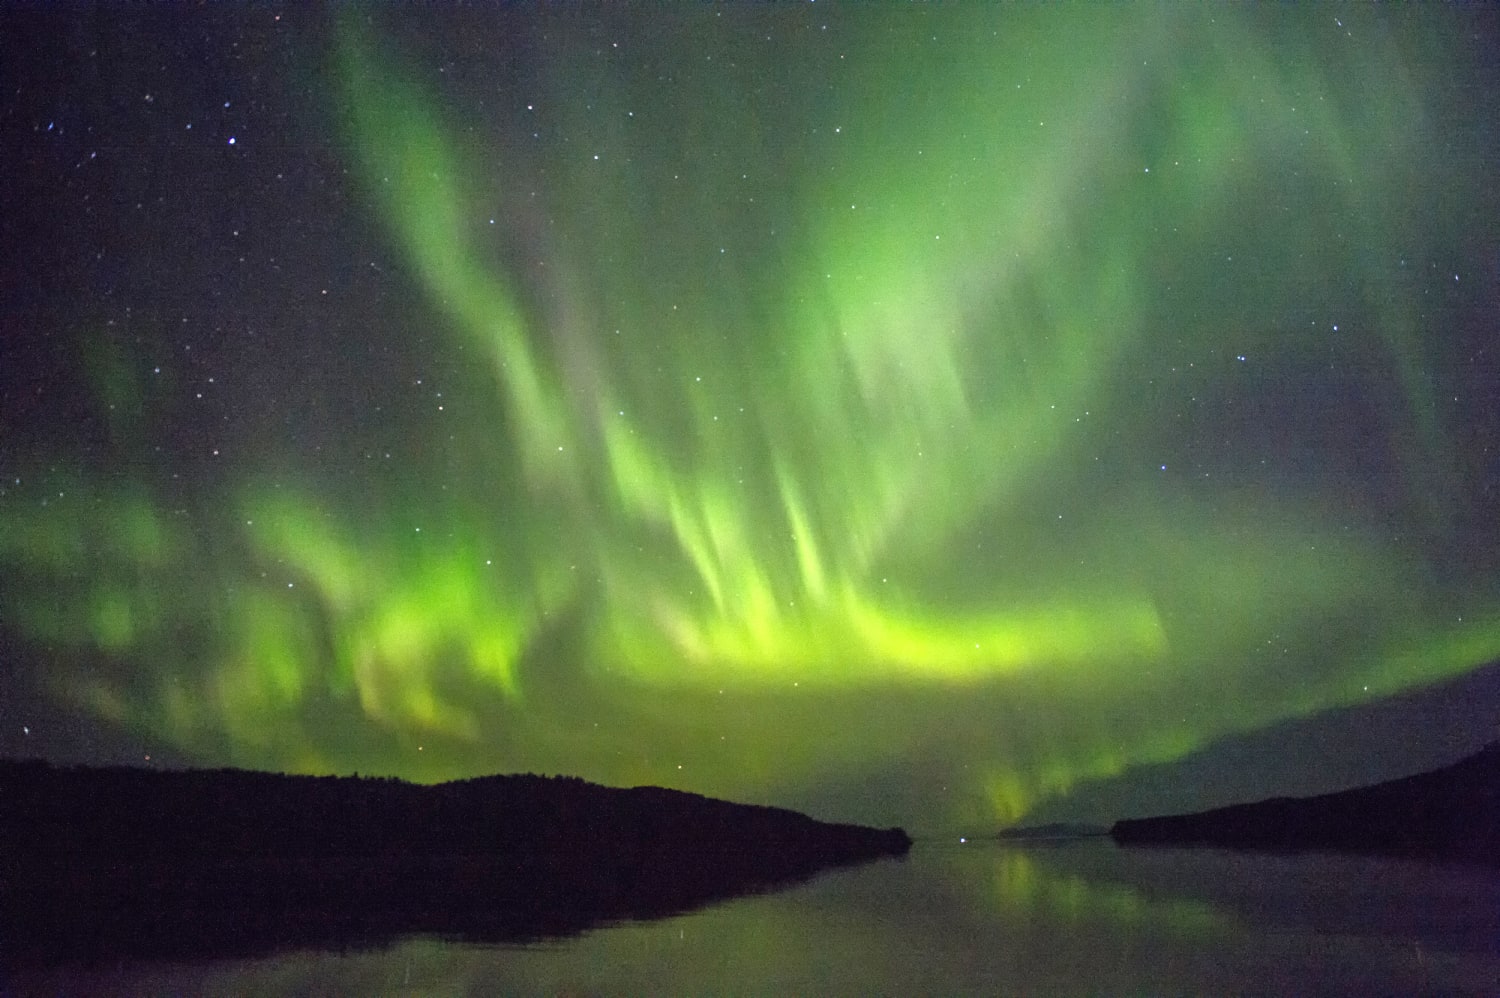 The northern lights can be visible in most parts of the United States due to the solar storm